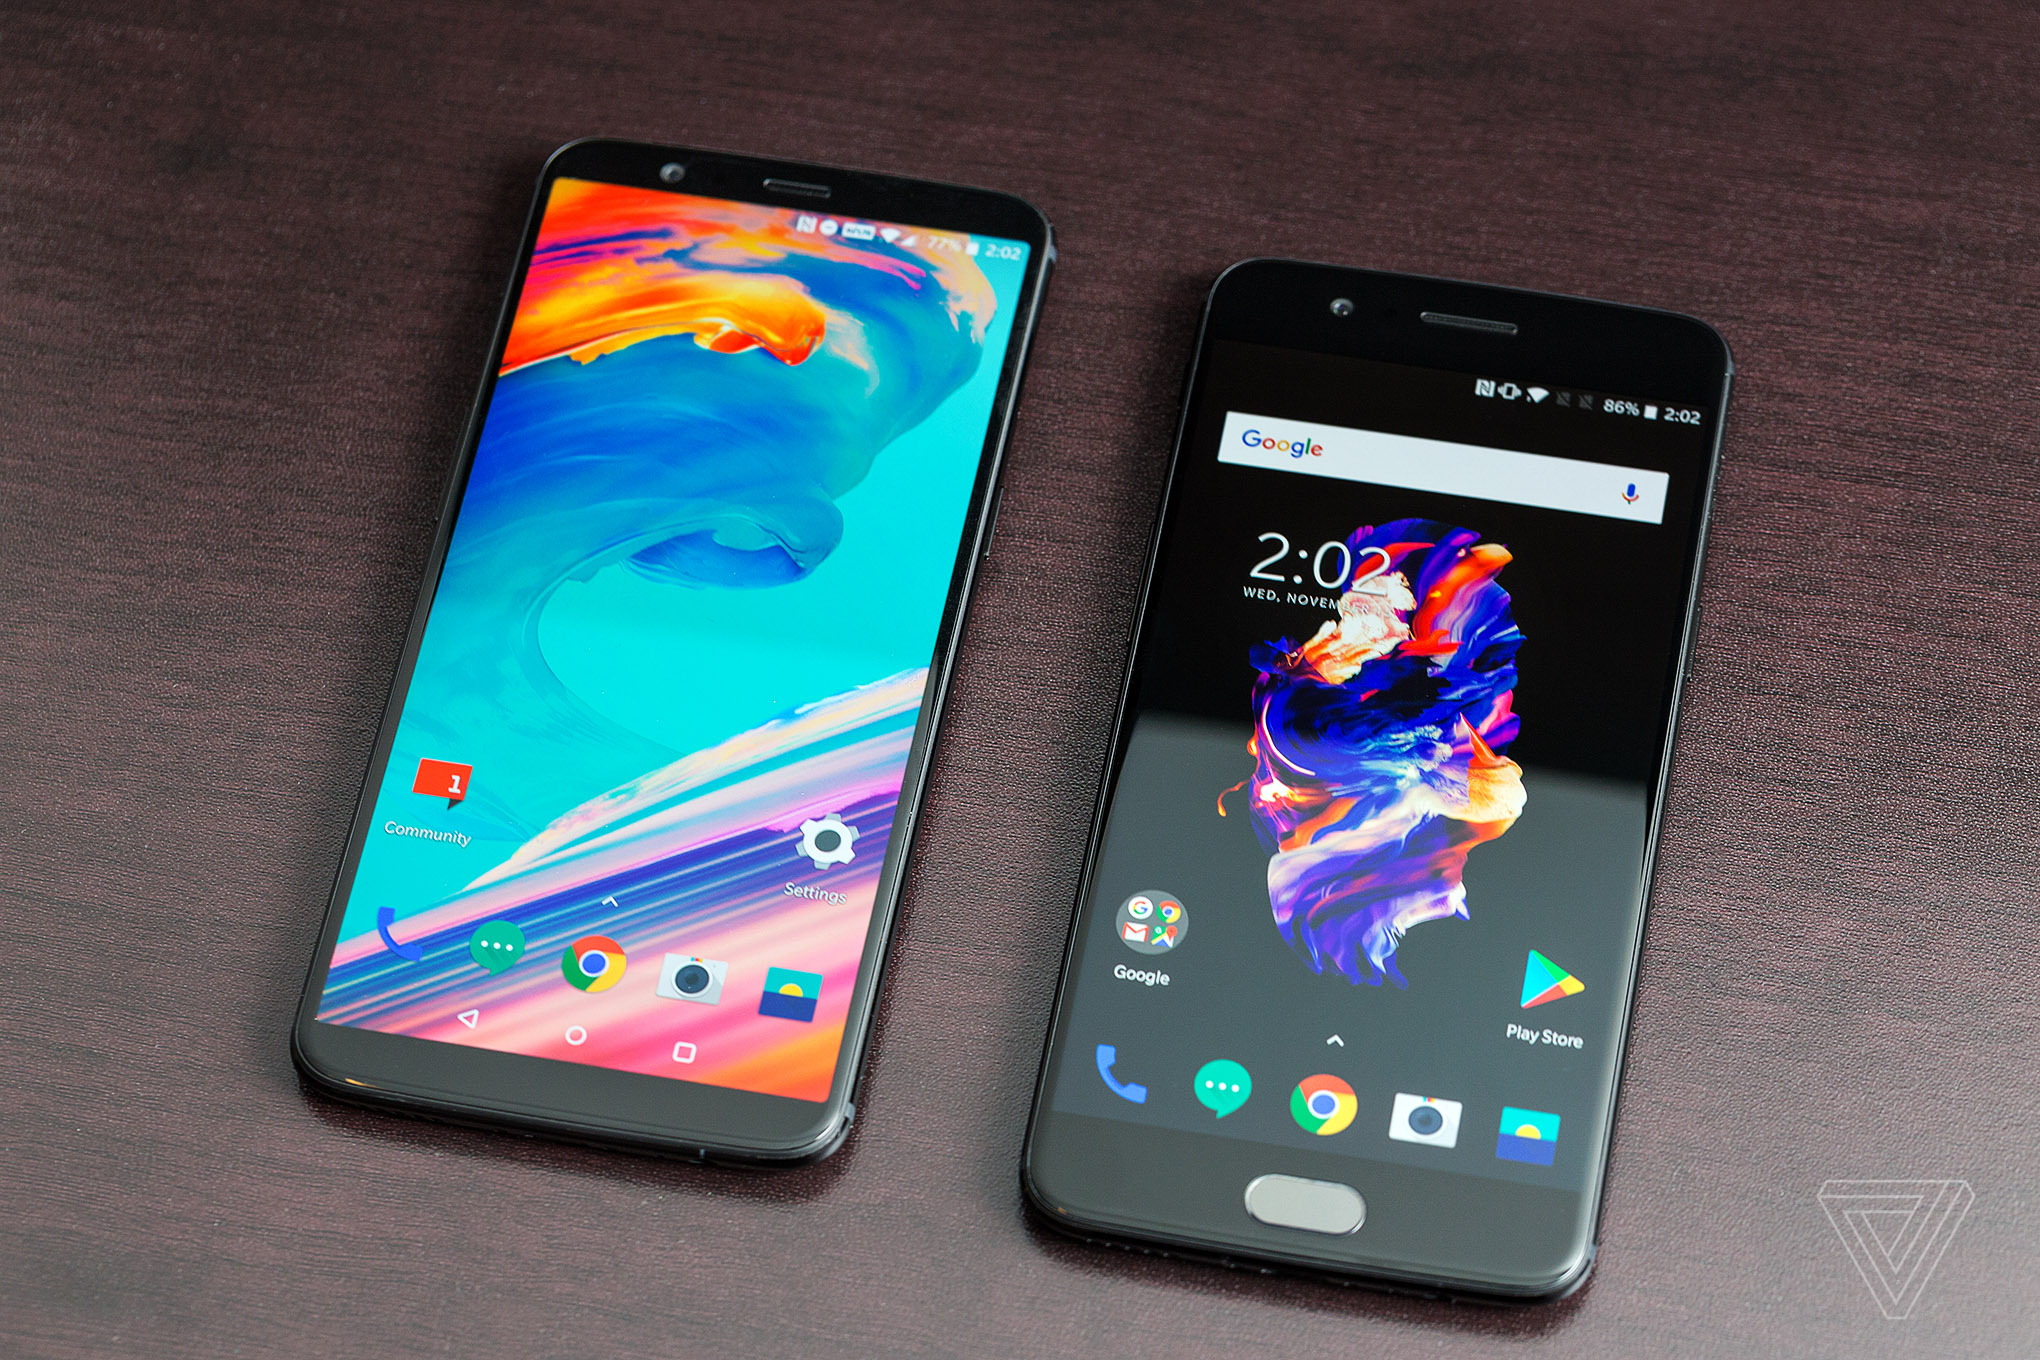 How to Install Lineage OS 15 on OnePlus 5T, Install Android 8.0 Oreo on OnePlus 5T, Install Lineage OS 15 on OnePlus 5T